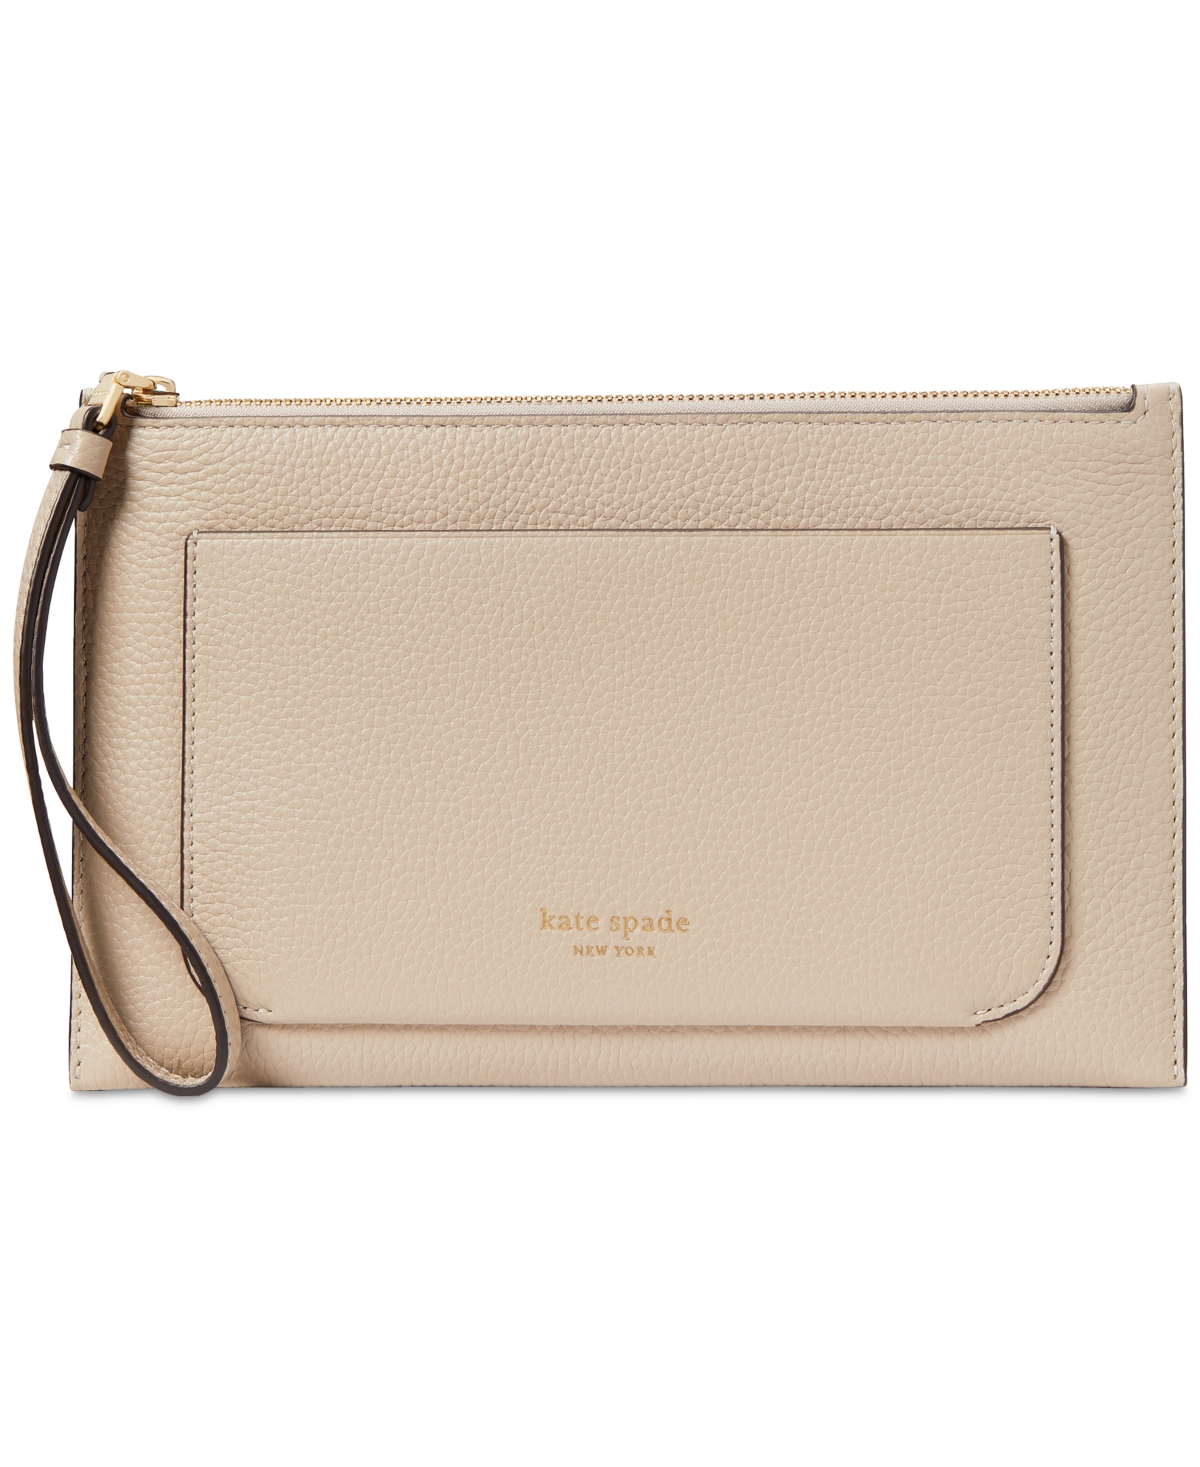 Kate Spade Ava Pebbled Leather Small Wristlet In Earthenware